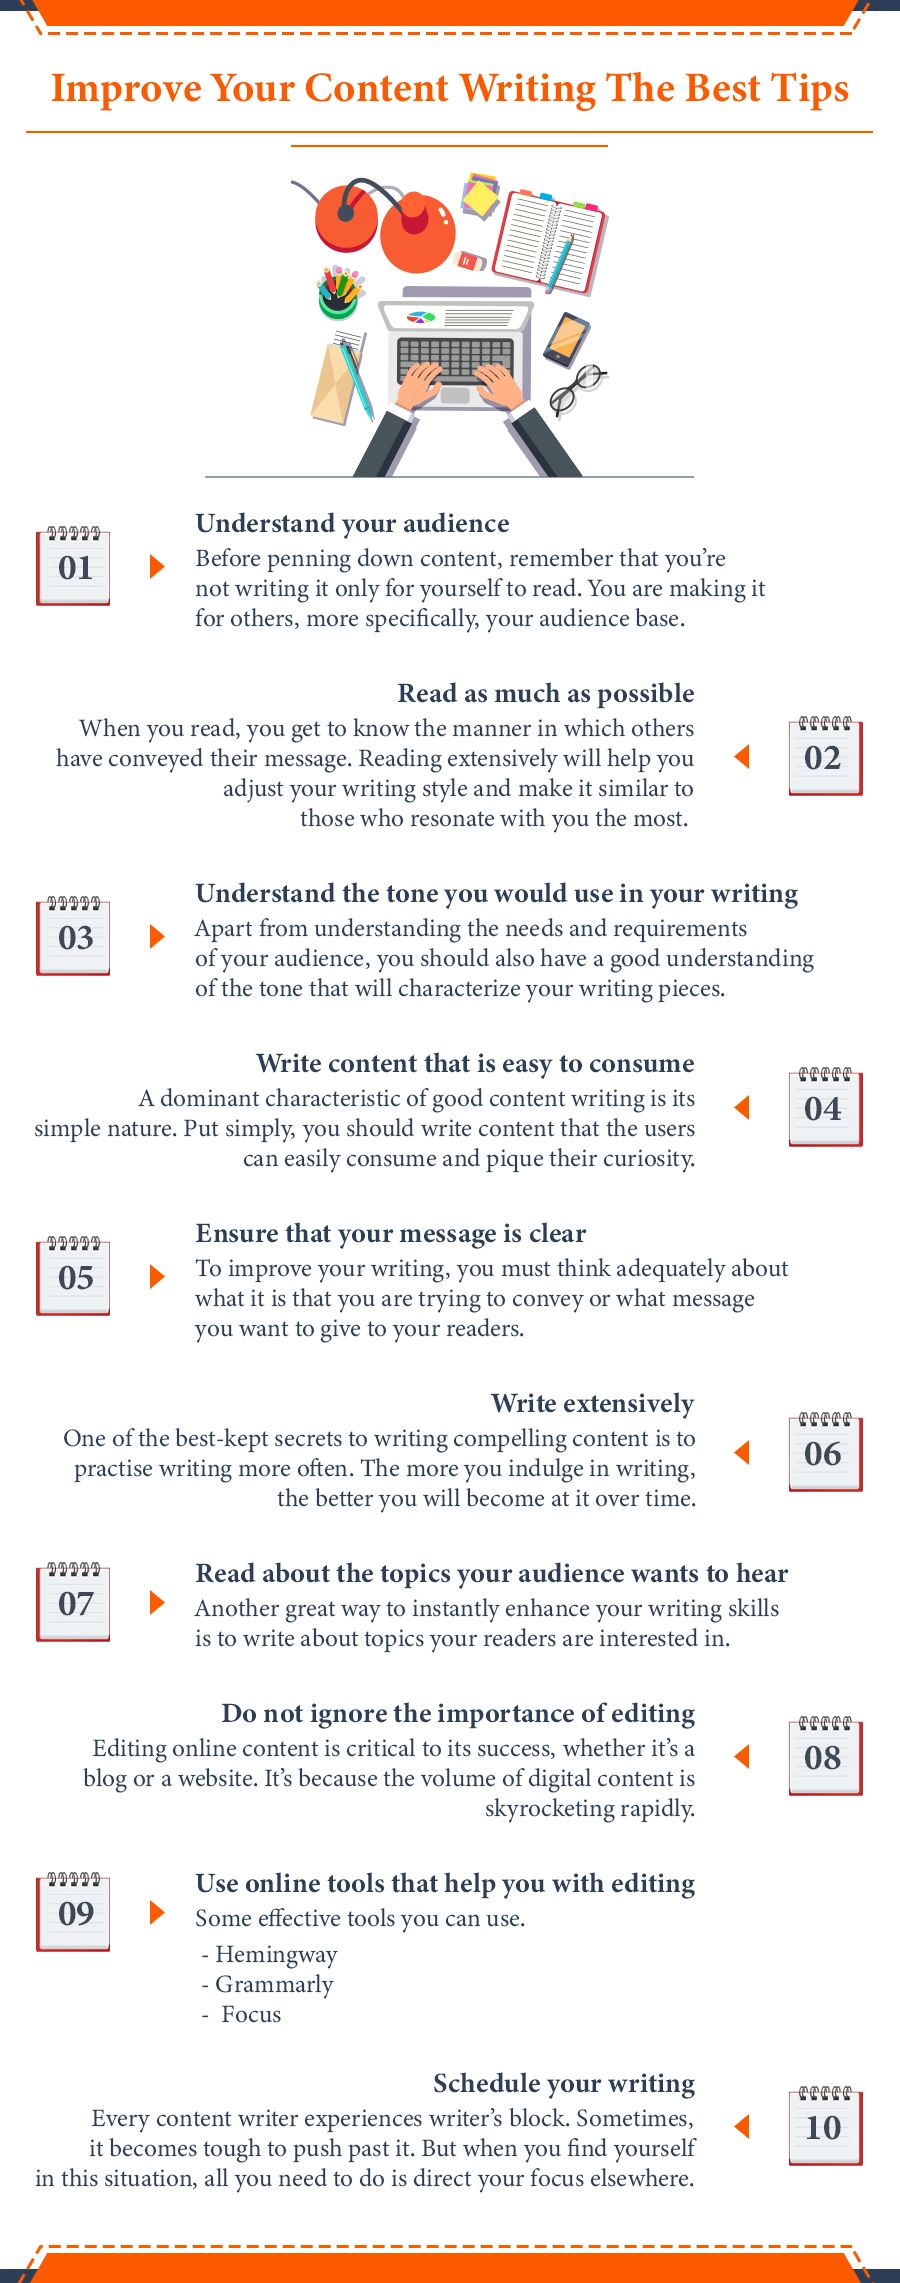 Improve Your Content Writing The Best Tips